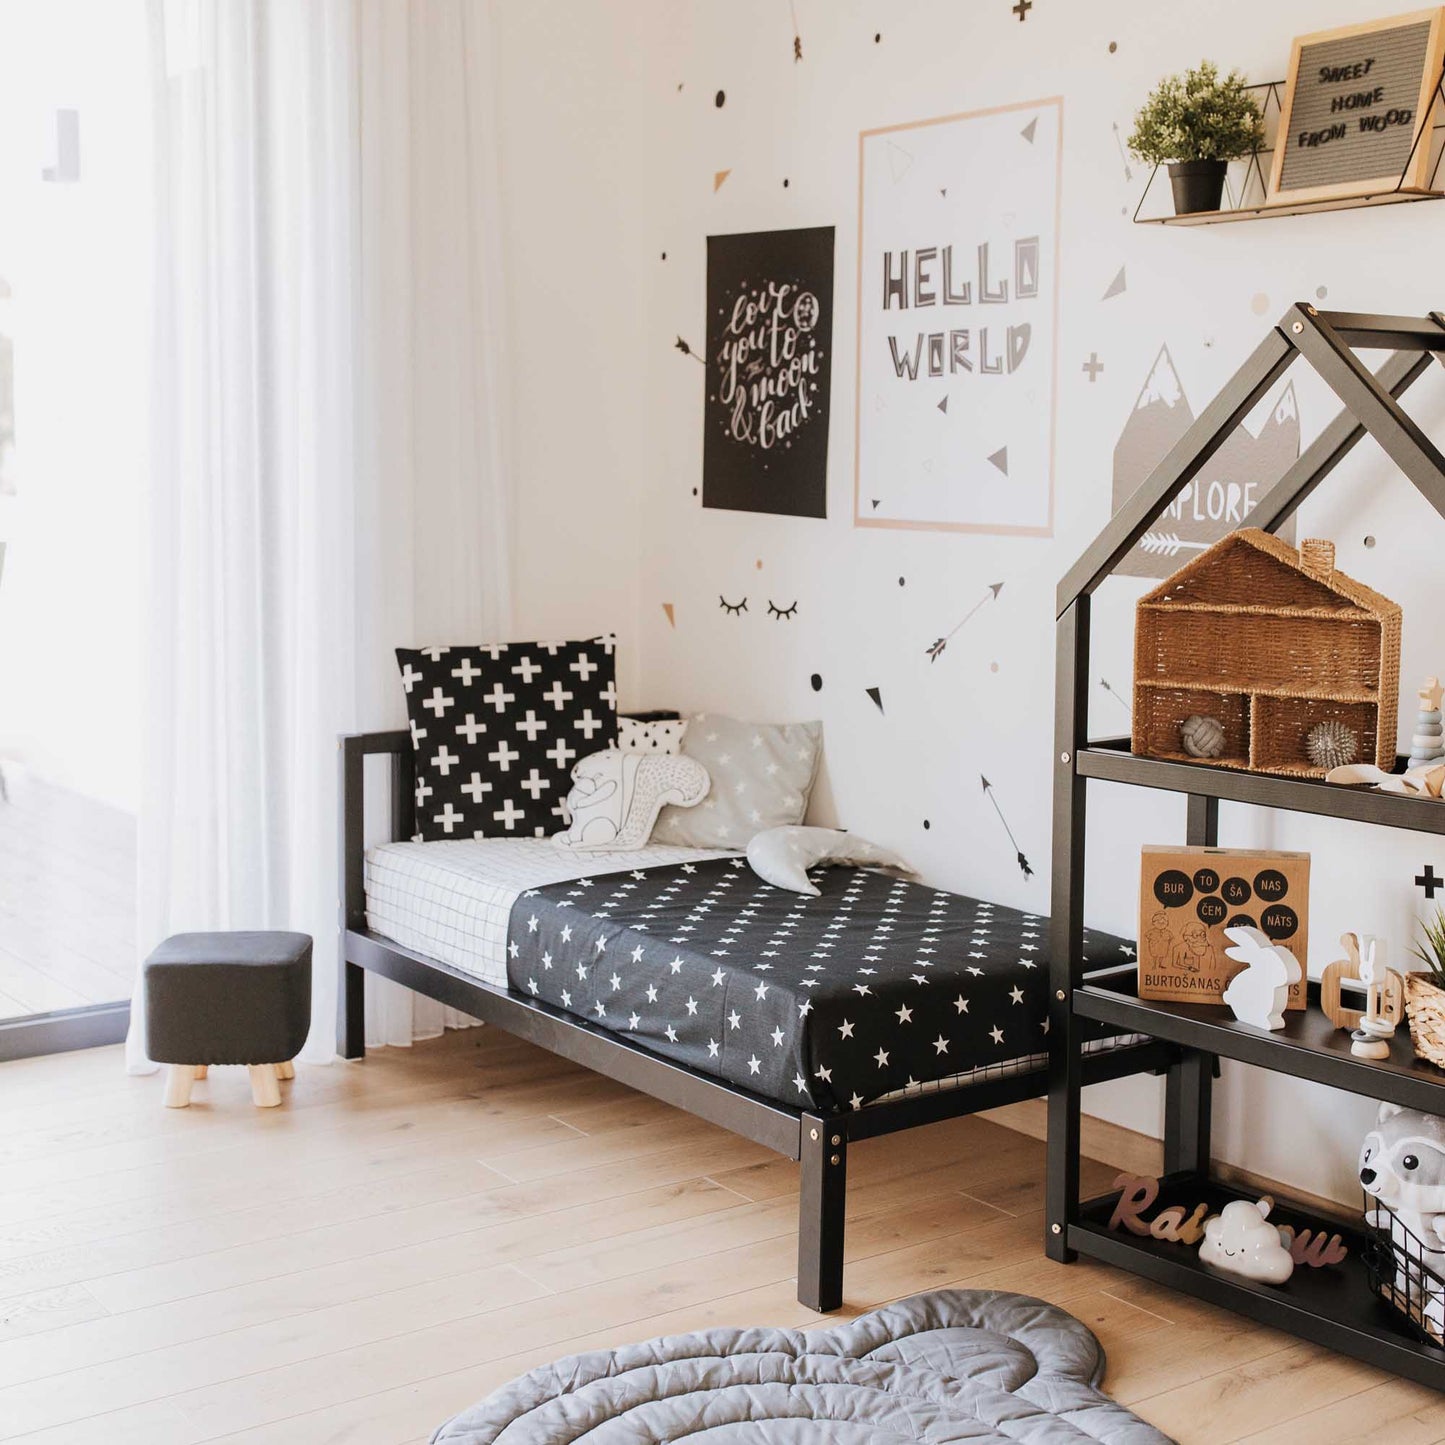 Kids' bed on legs with a headboard